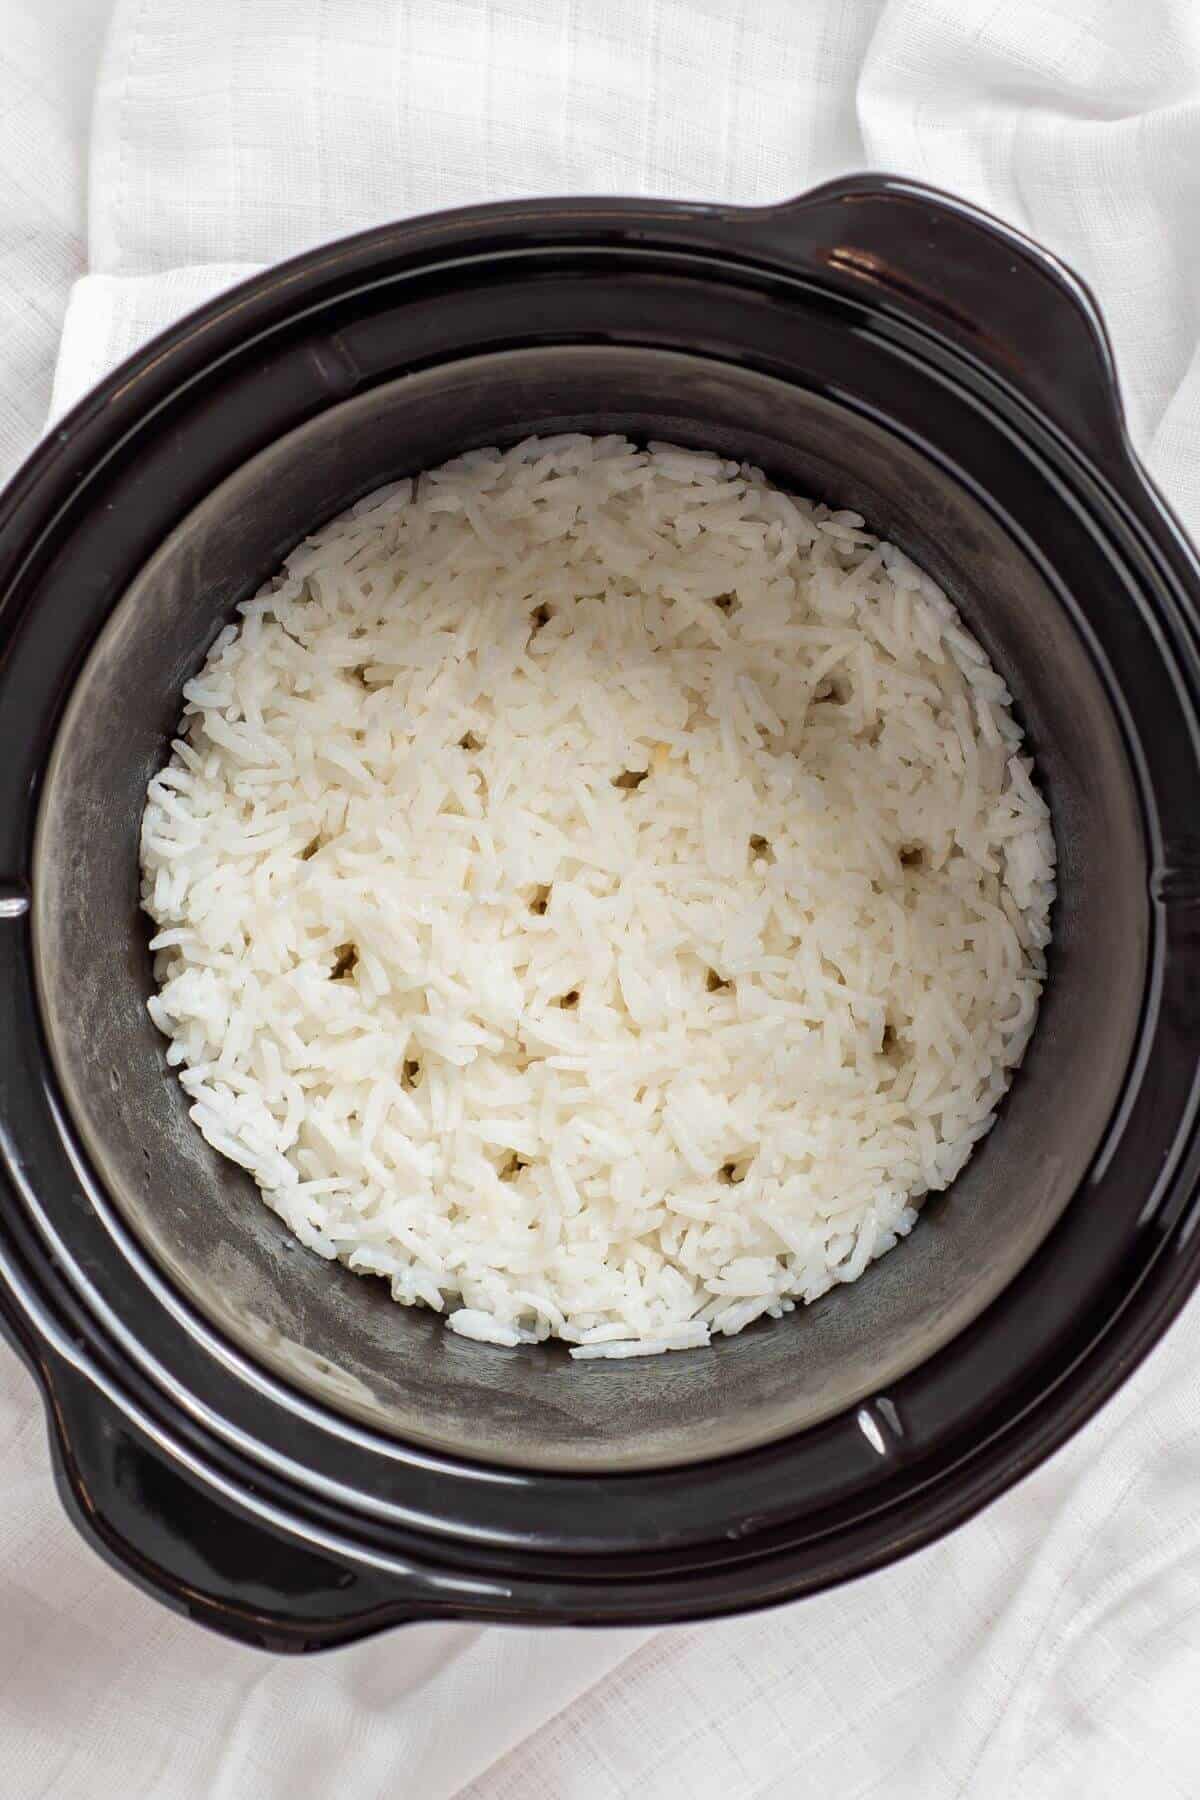 A crock pot filled with rice on top of a white towel.